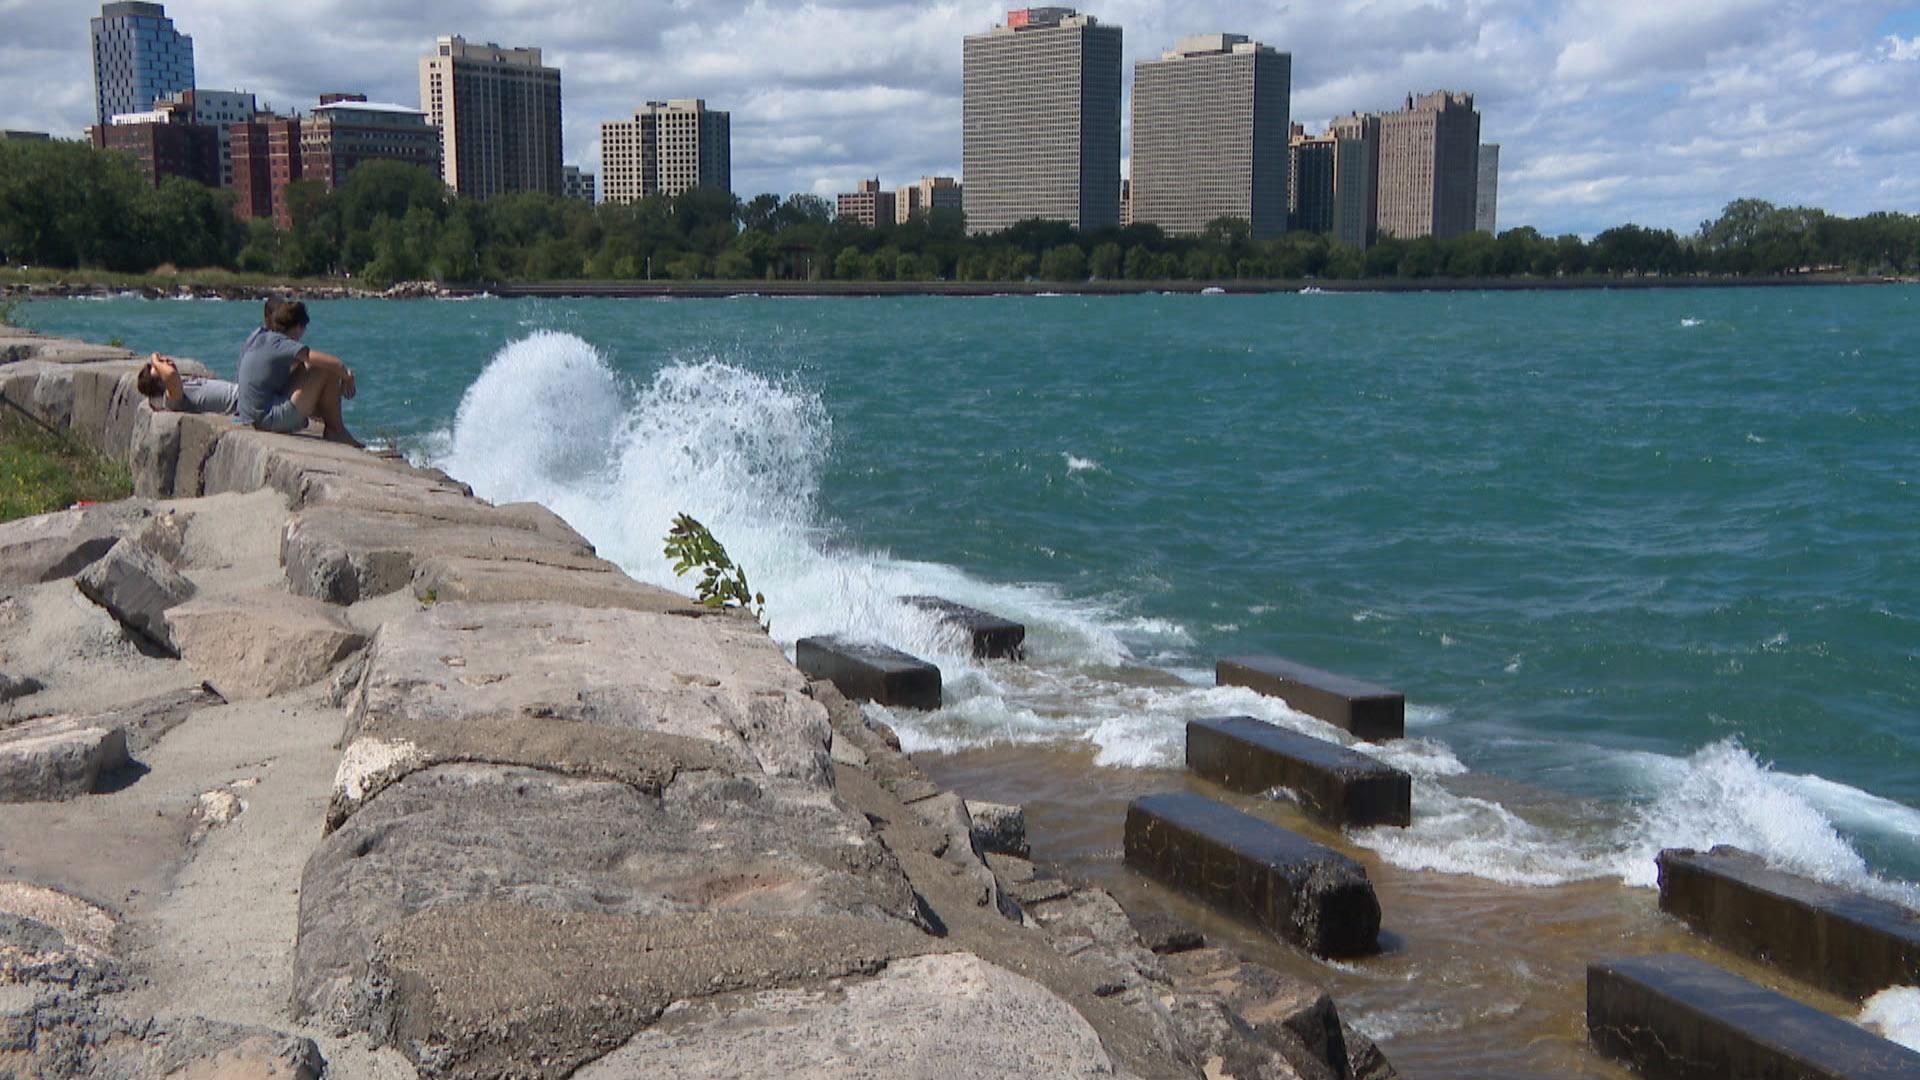 Beware of high waves on Lake Michigan near piers, jetties and other shoreline structures. (WTTW News)